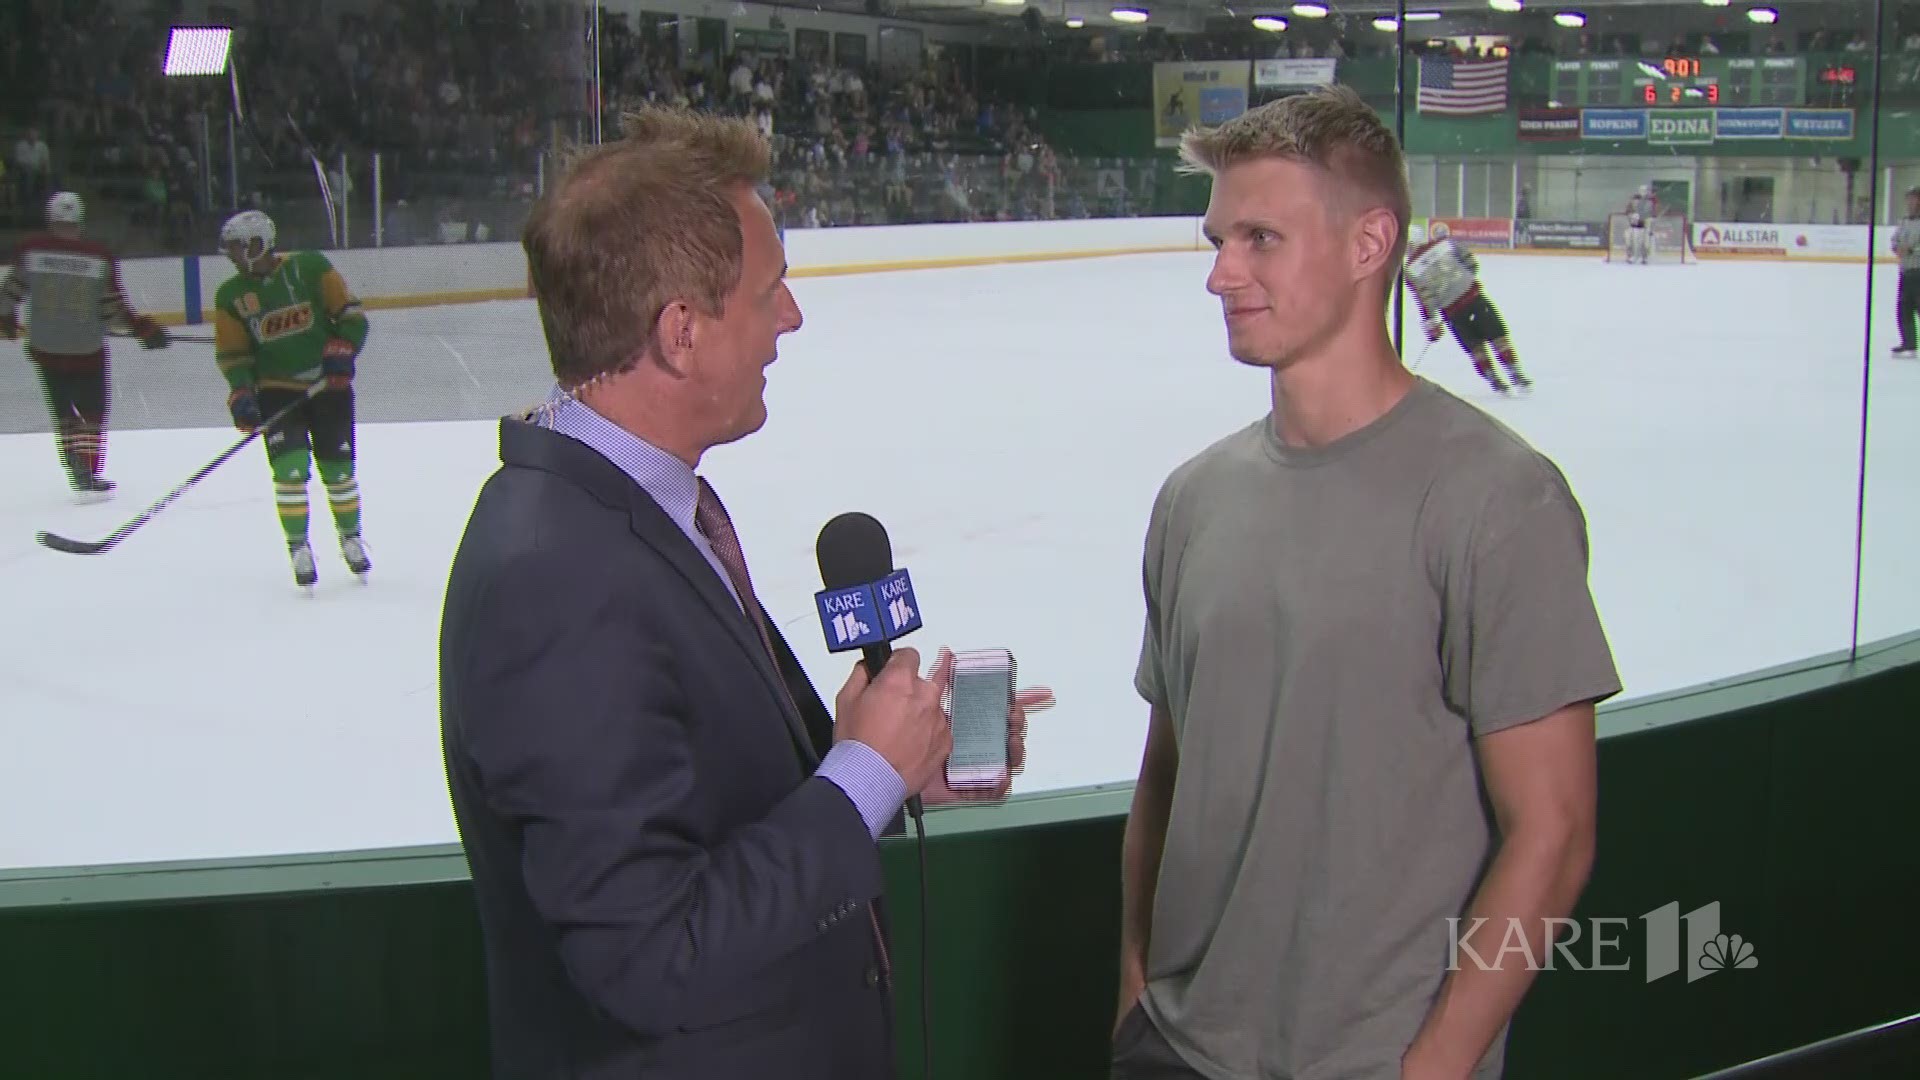 As Da Beauty League drops the puck on another summer season, KARE 11's Eric Perkins catches up with Florida Panther (and Blaine, MN native) Nick Bjugstad at Braemar Arena in Edina.